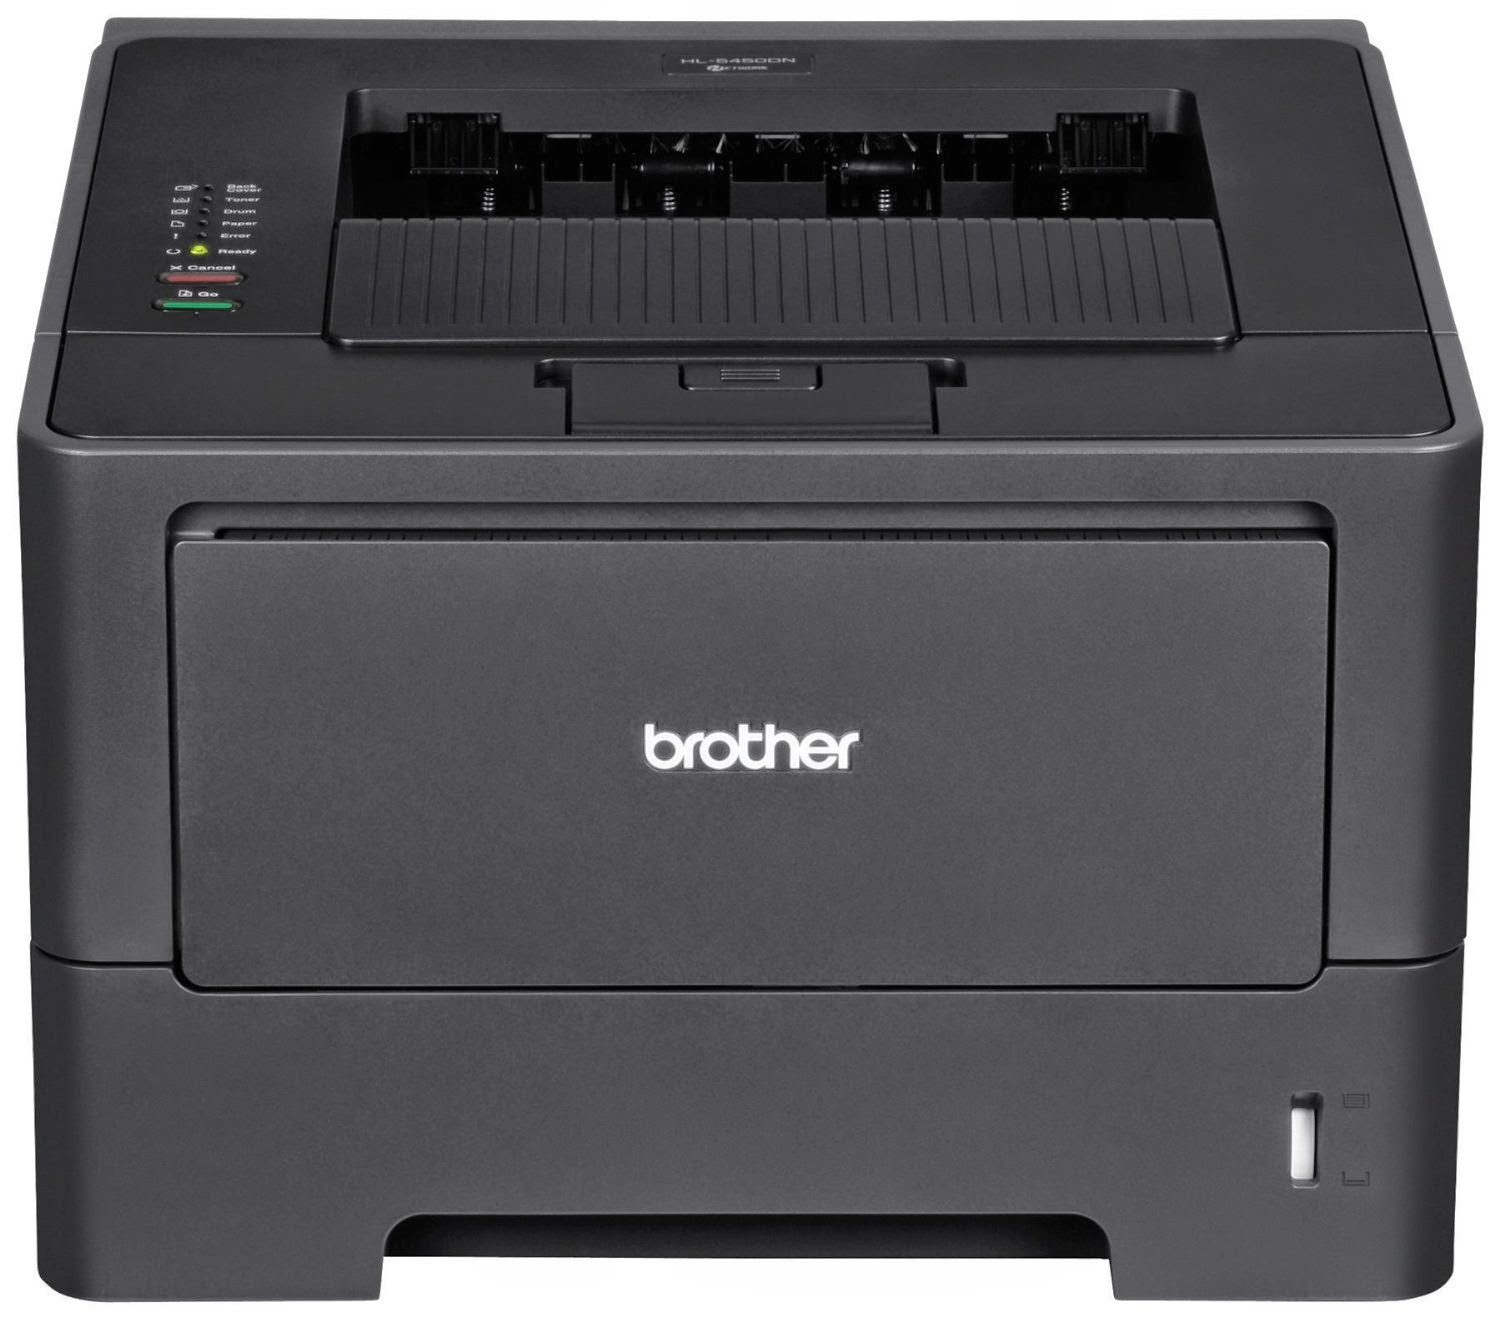 Brother Laser Printer HL5450DN High-Speed With Networking and Duplex